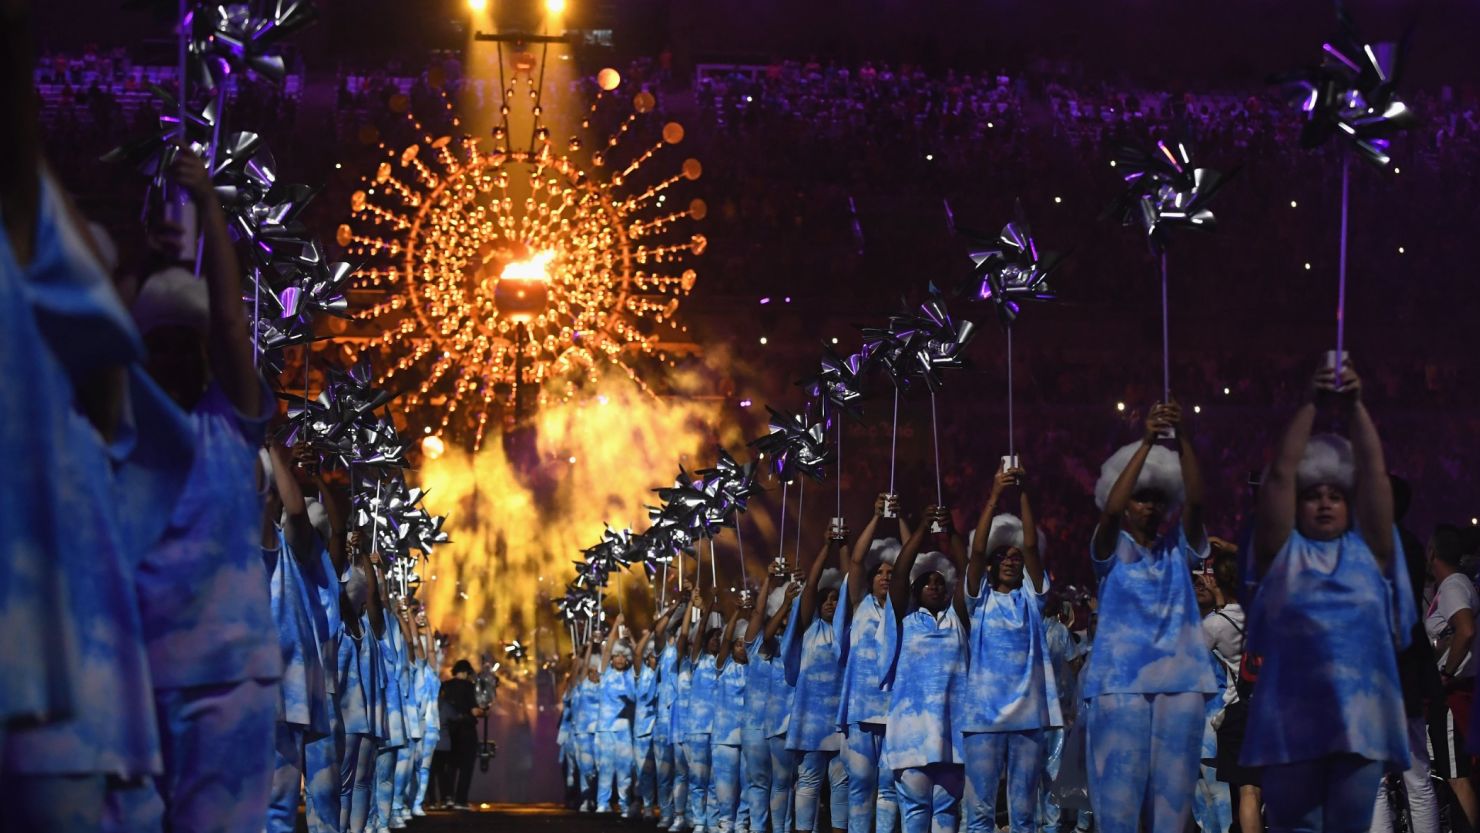 Sunday's closing ceremony was a joyful extravaganza of music and dance, tinged with sadness.